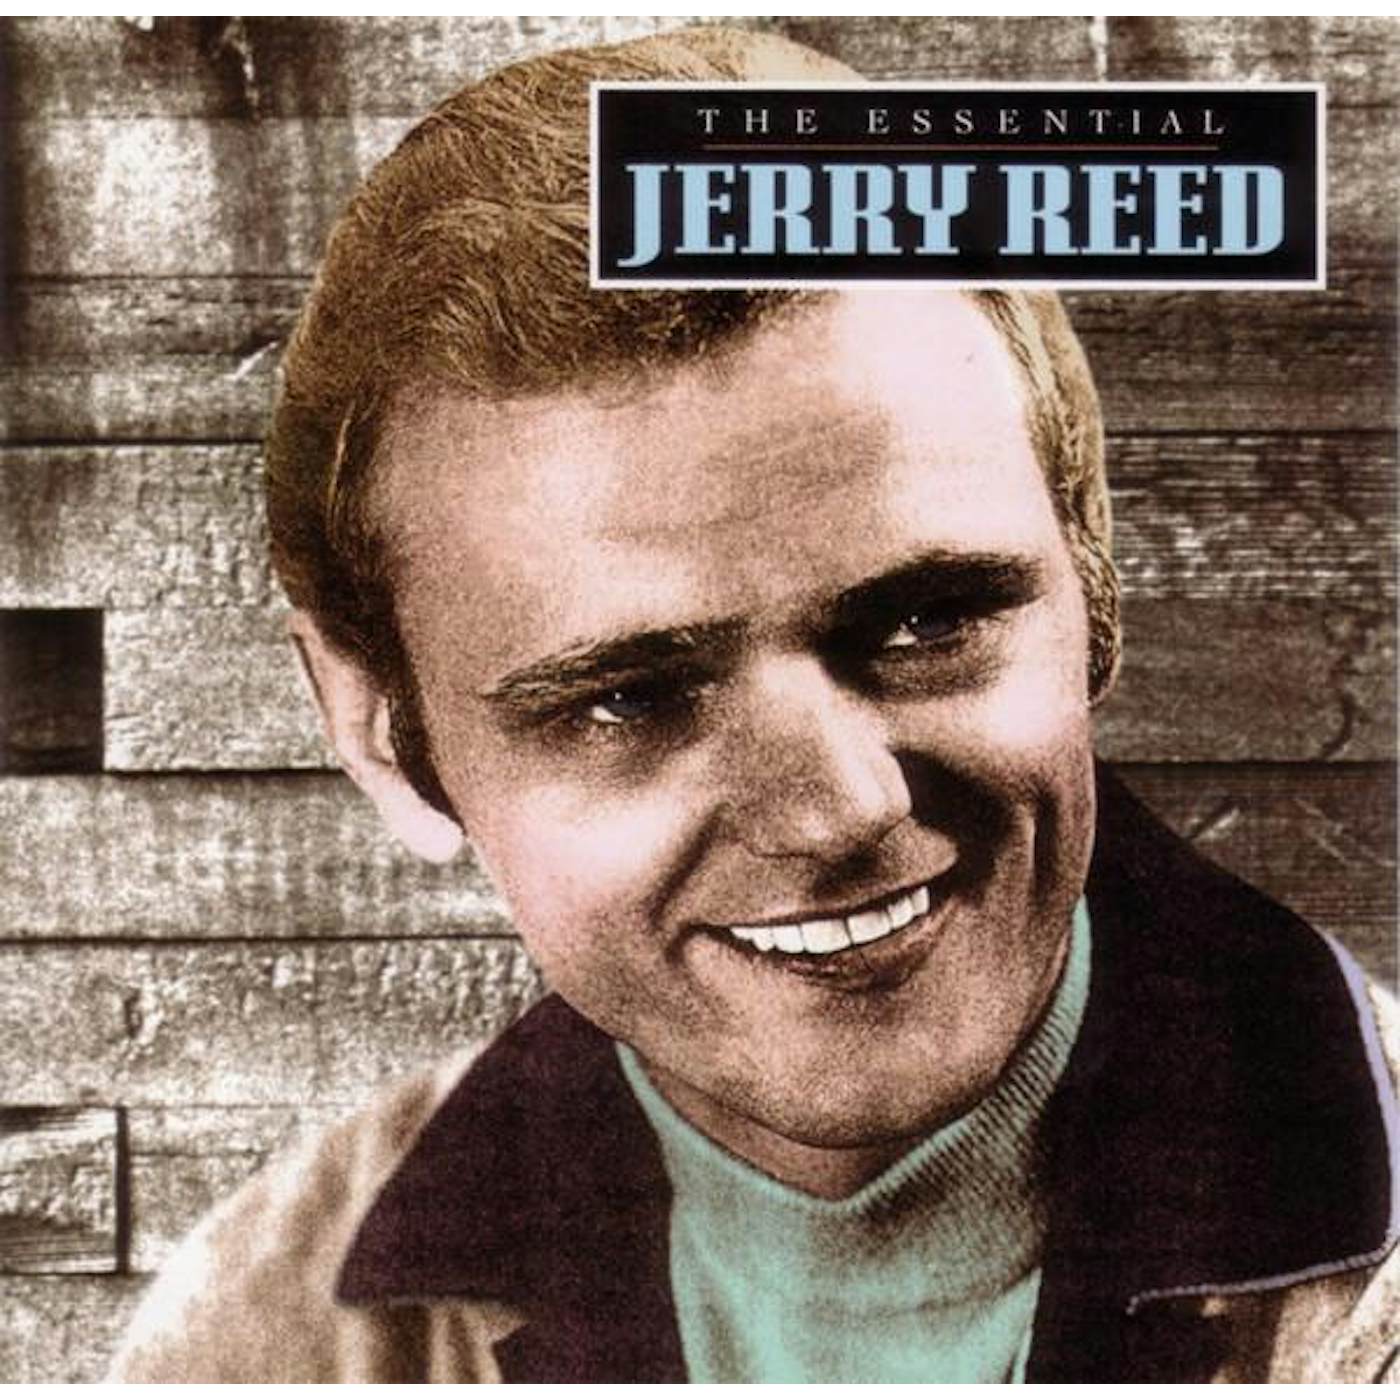 ESSENTIAL JERRY REED CD